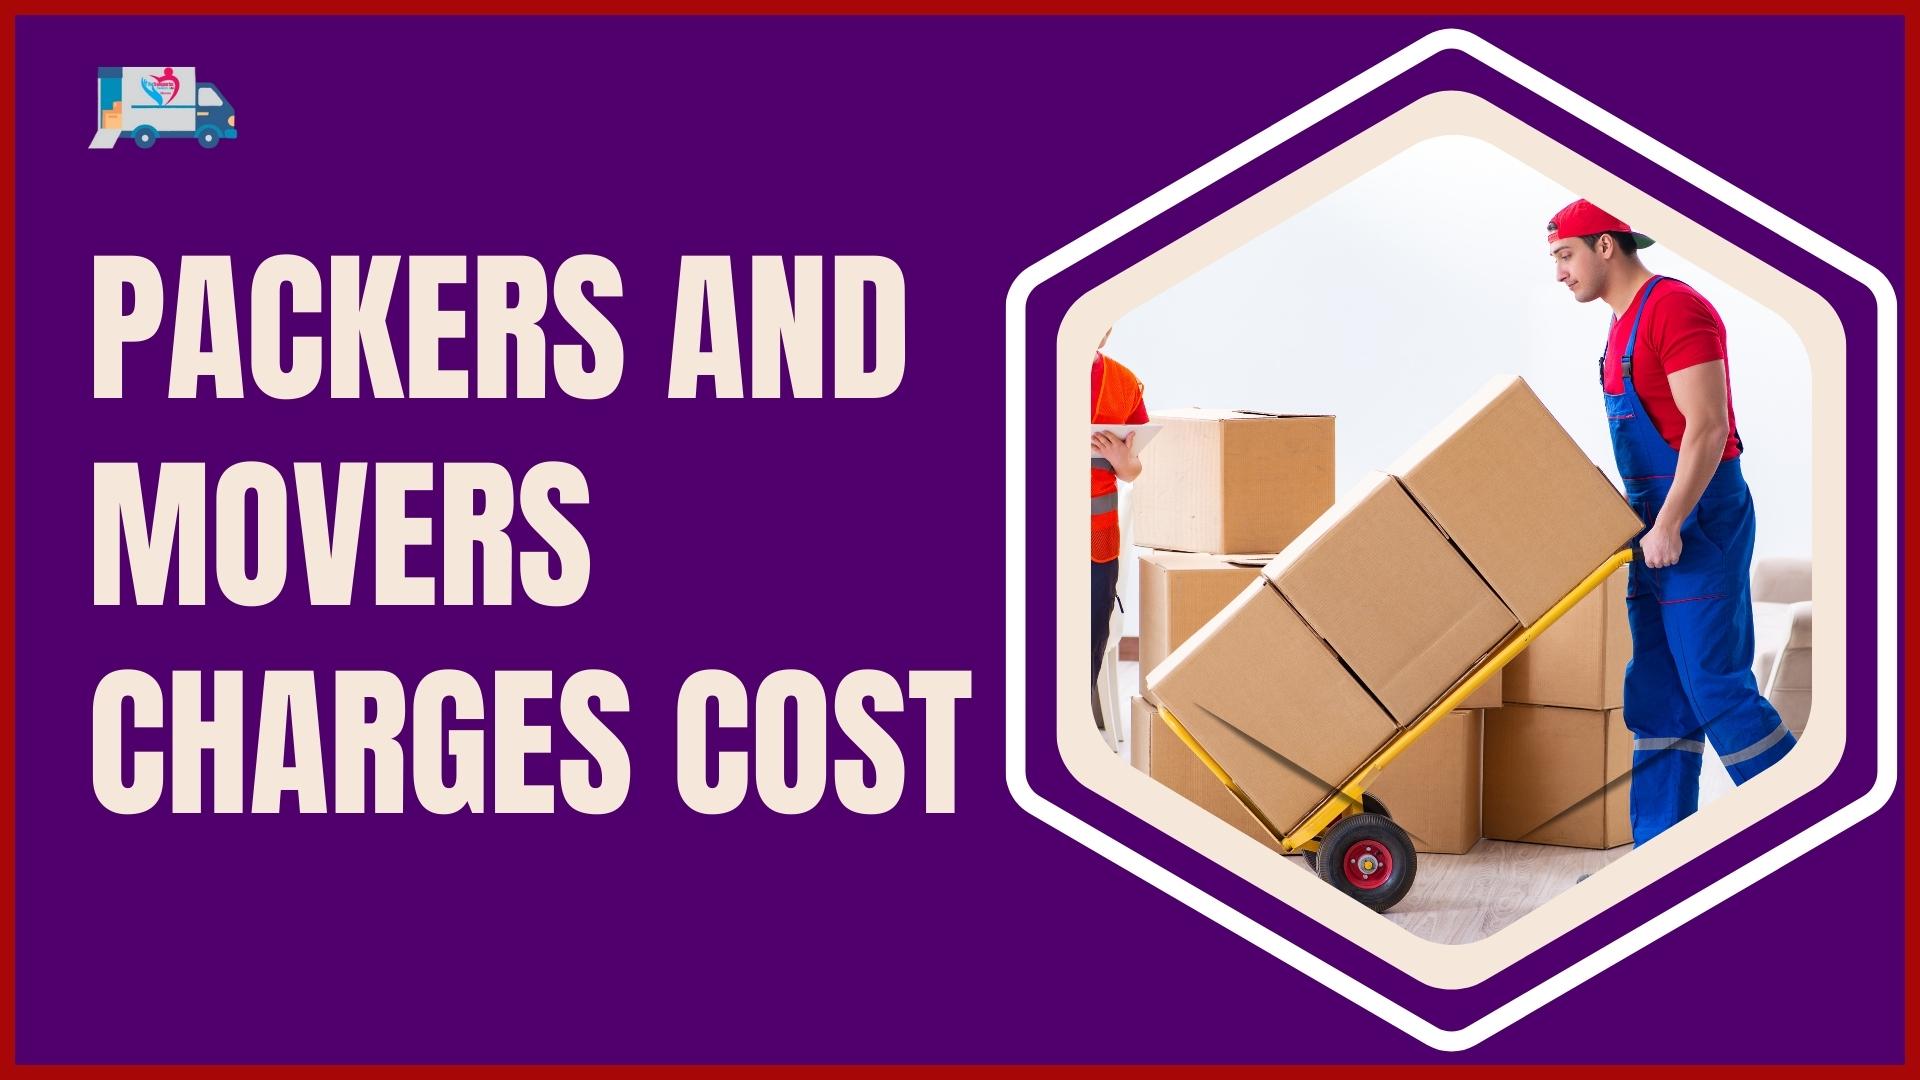 Packers and Movers offers competitive movers and packers Tirunelveli rates and excellent services